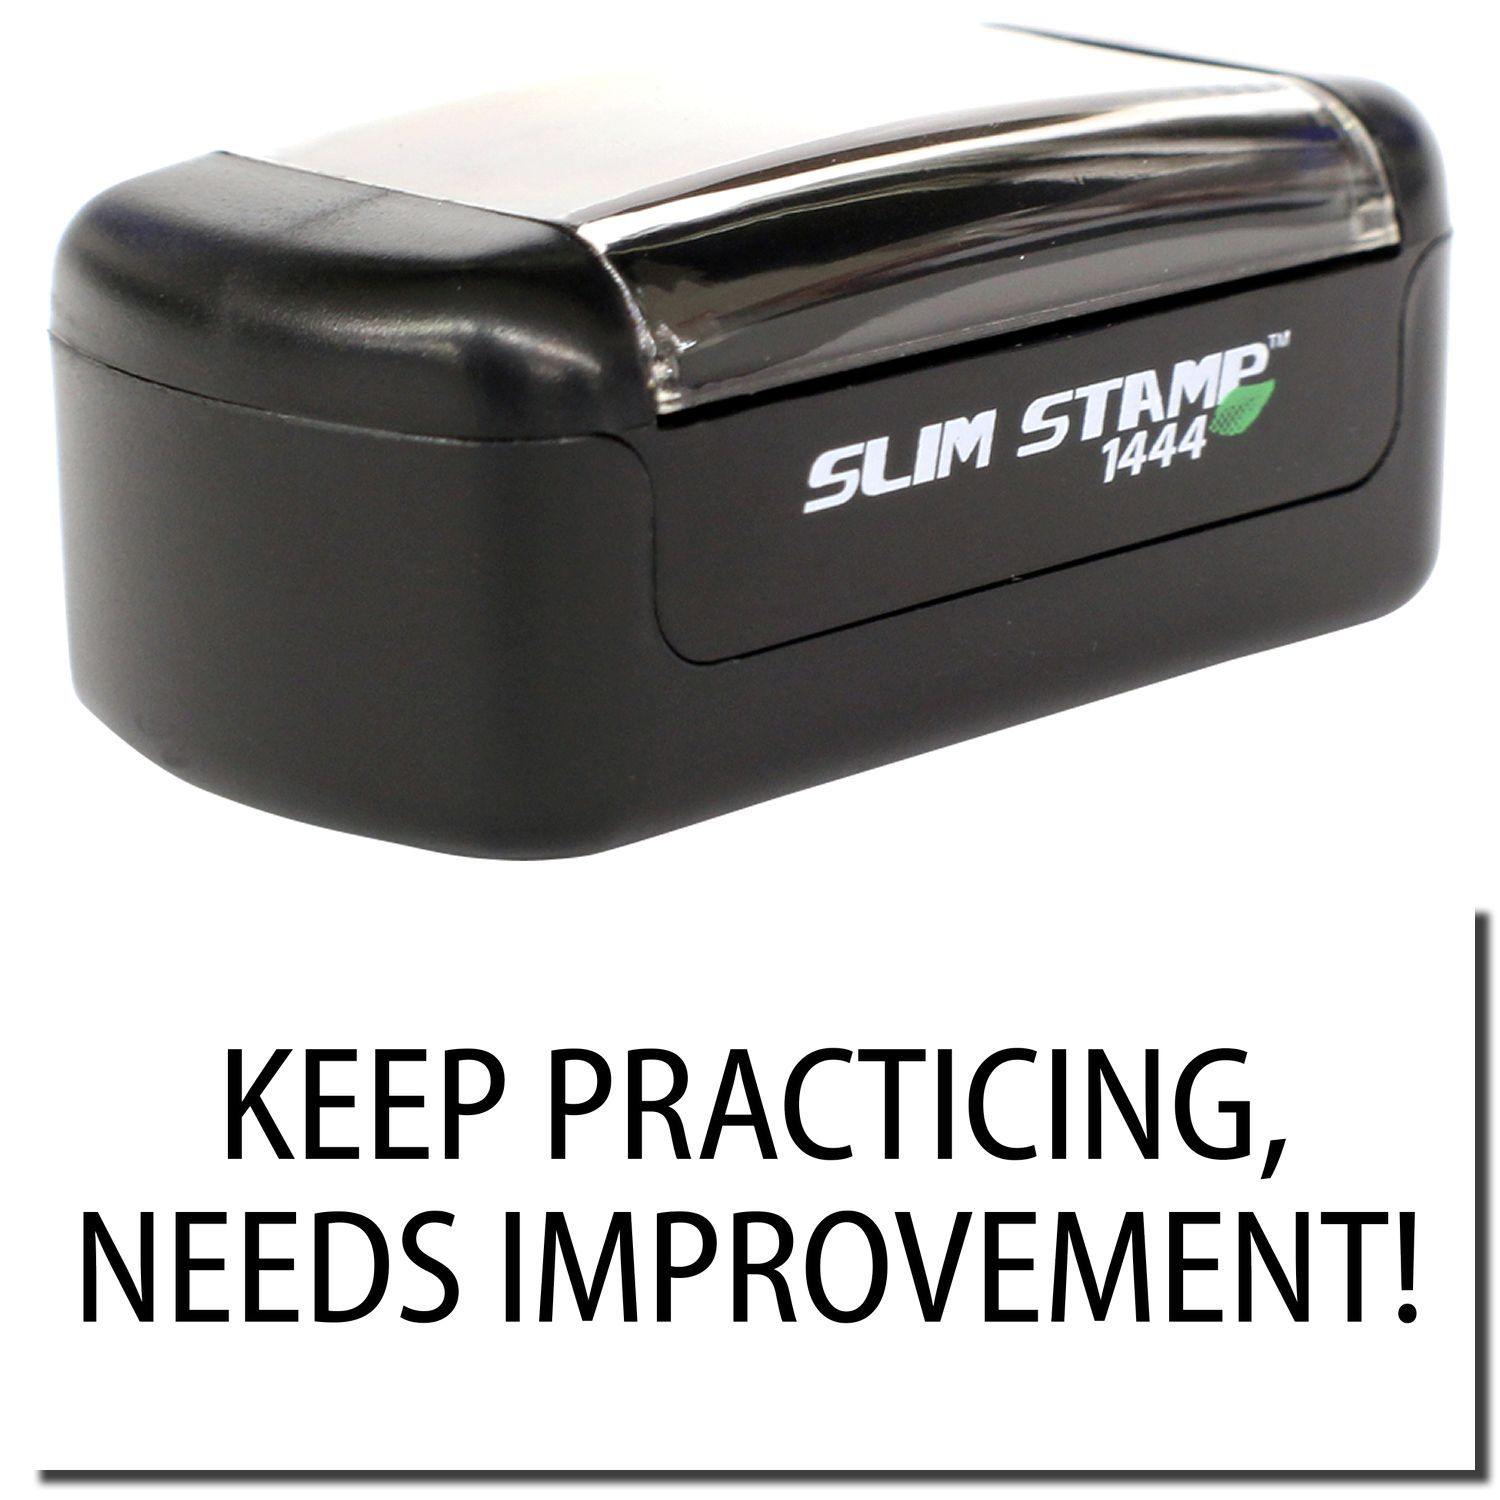 A stock office pre-inked stamp with a stamped image showing how the text "KEEP PRACTICING, NEEDS IMPROVEMENT!" is displayed after stamping.